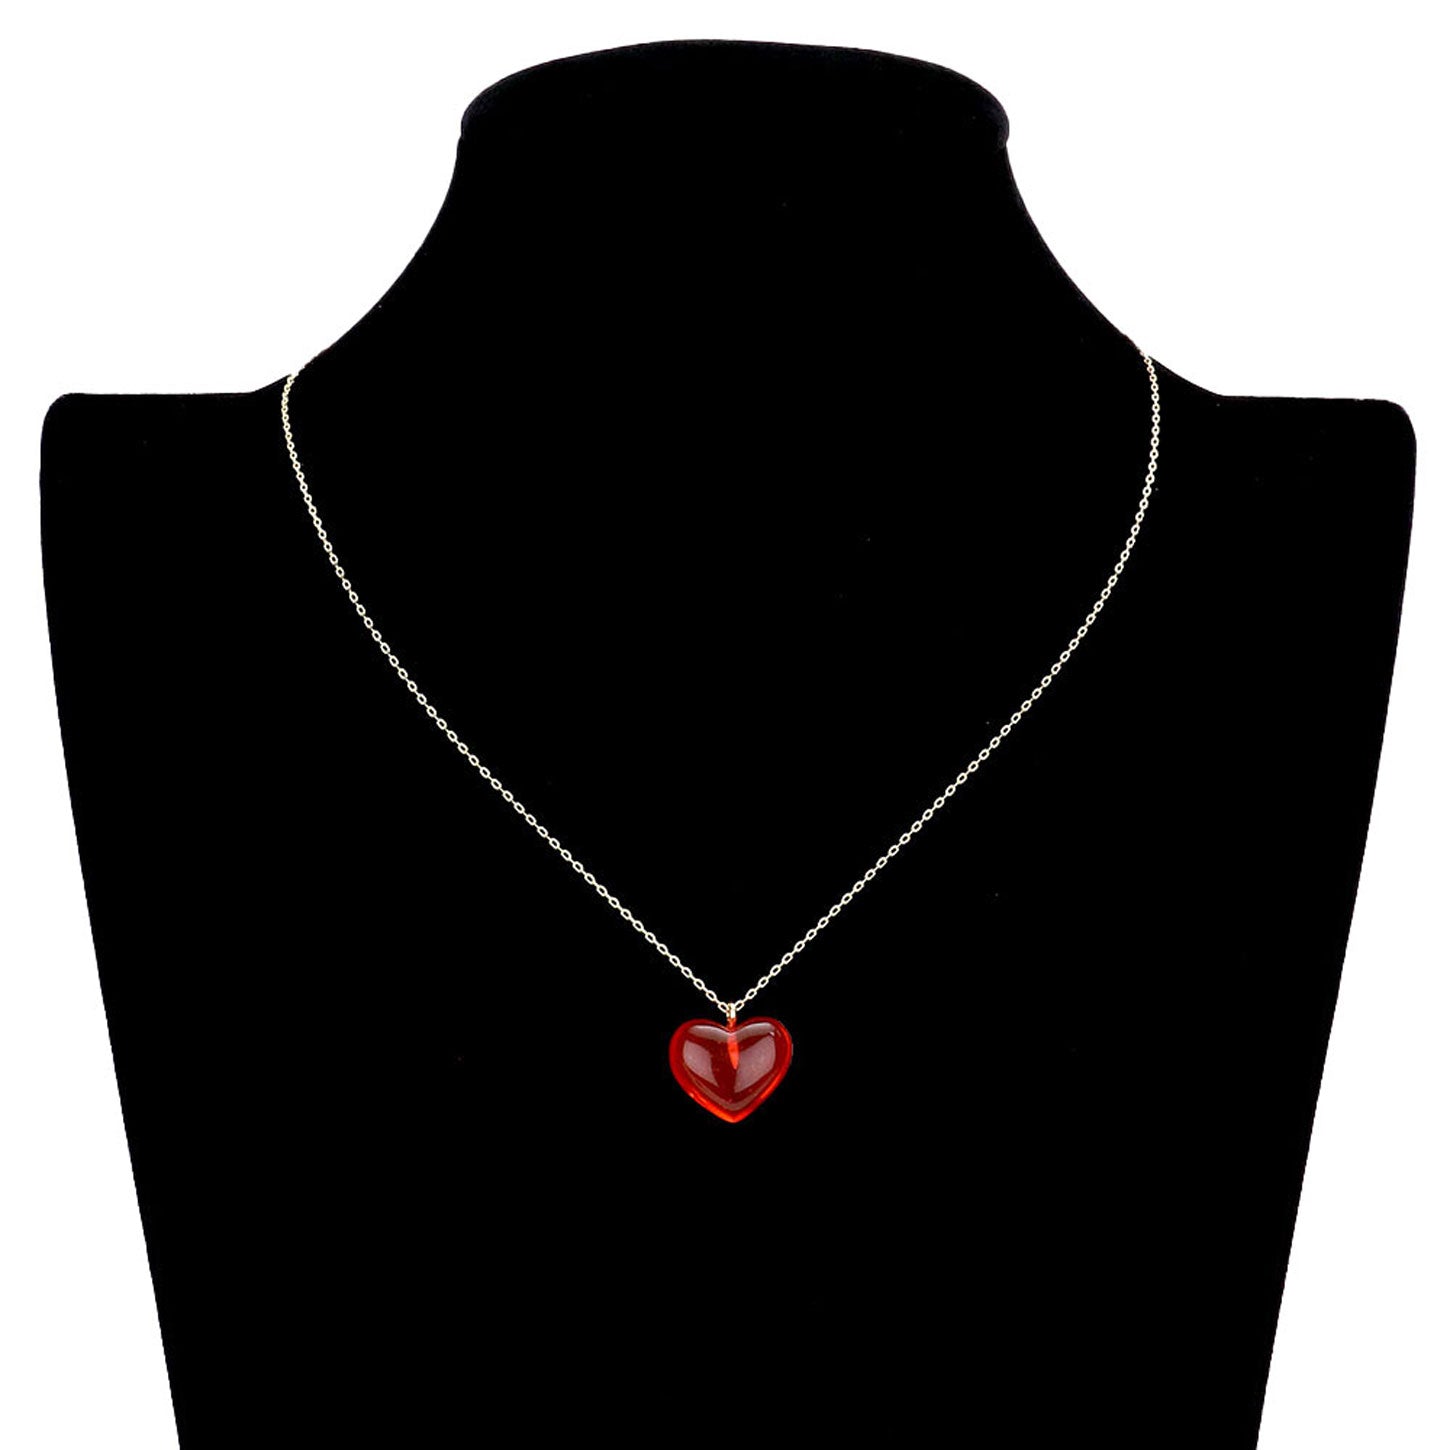 Red Brass Metal Lucite Heart Pendant Necklace, Get ready with these Lucite Heart Pendant Necklace, put on a pop of color to complete your ensemble. Perfect for adding just the right amount of shimmer & shine and a touch of class to special events. Perfect Birthday Gift, Anniversary Gift, Mother's Day Gift, Graduation Gift